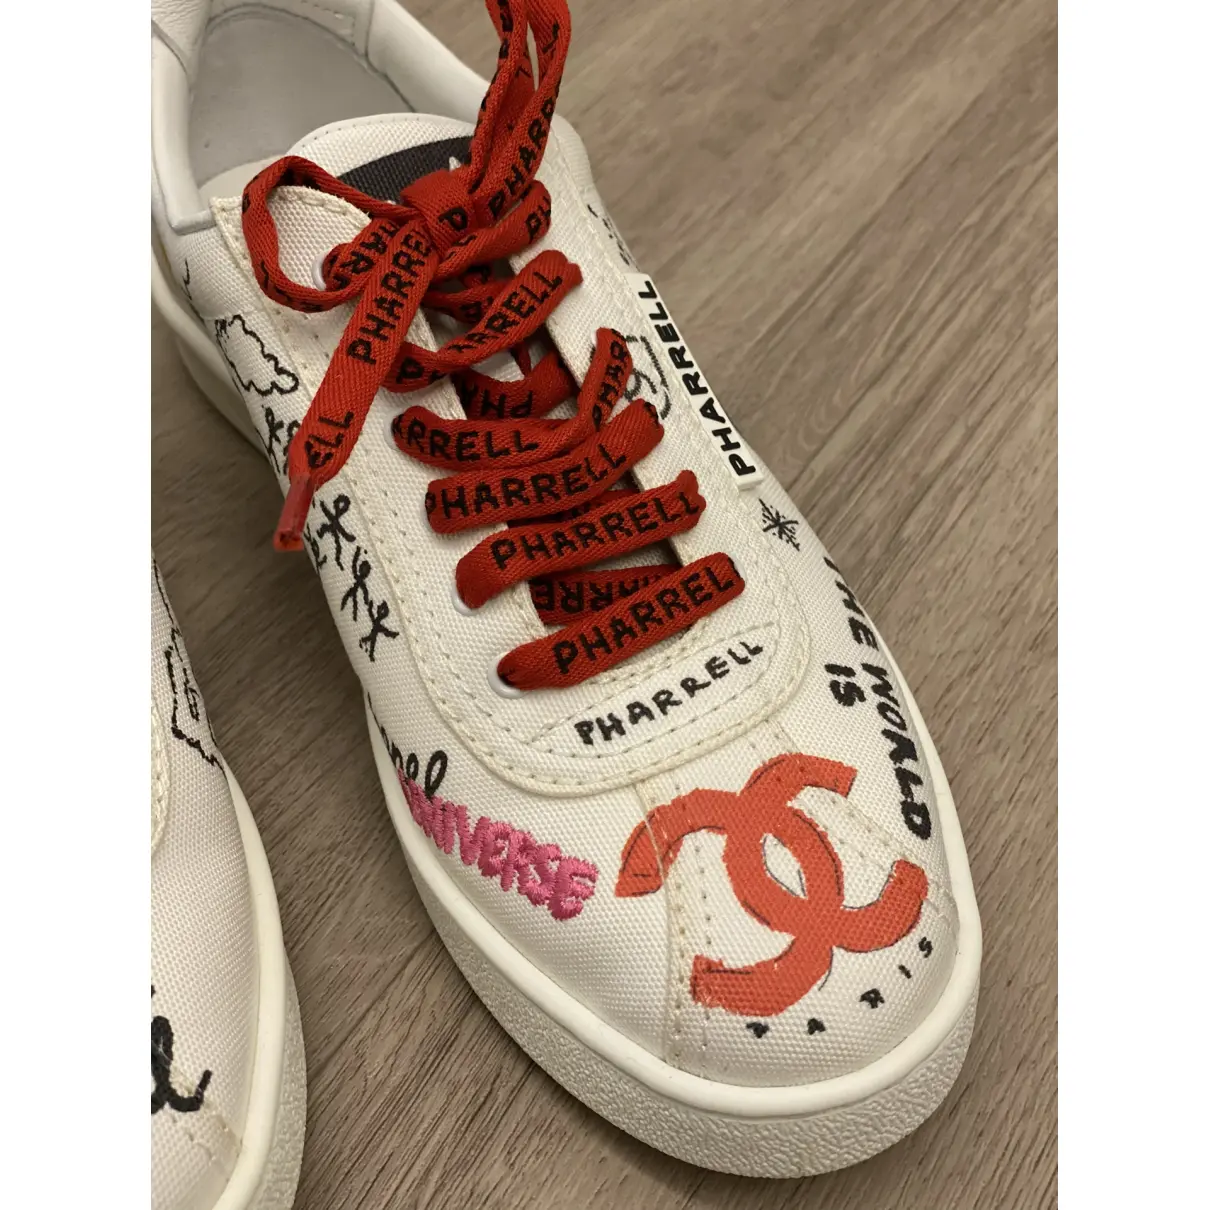 Buy Chanel x Pharrell Williams Cloth trainers online